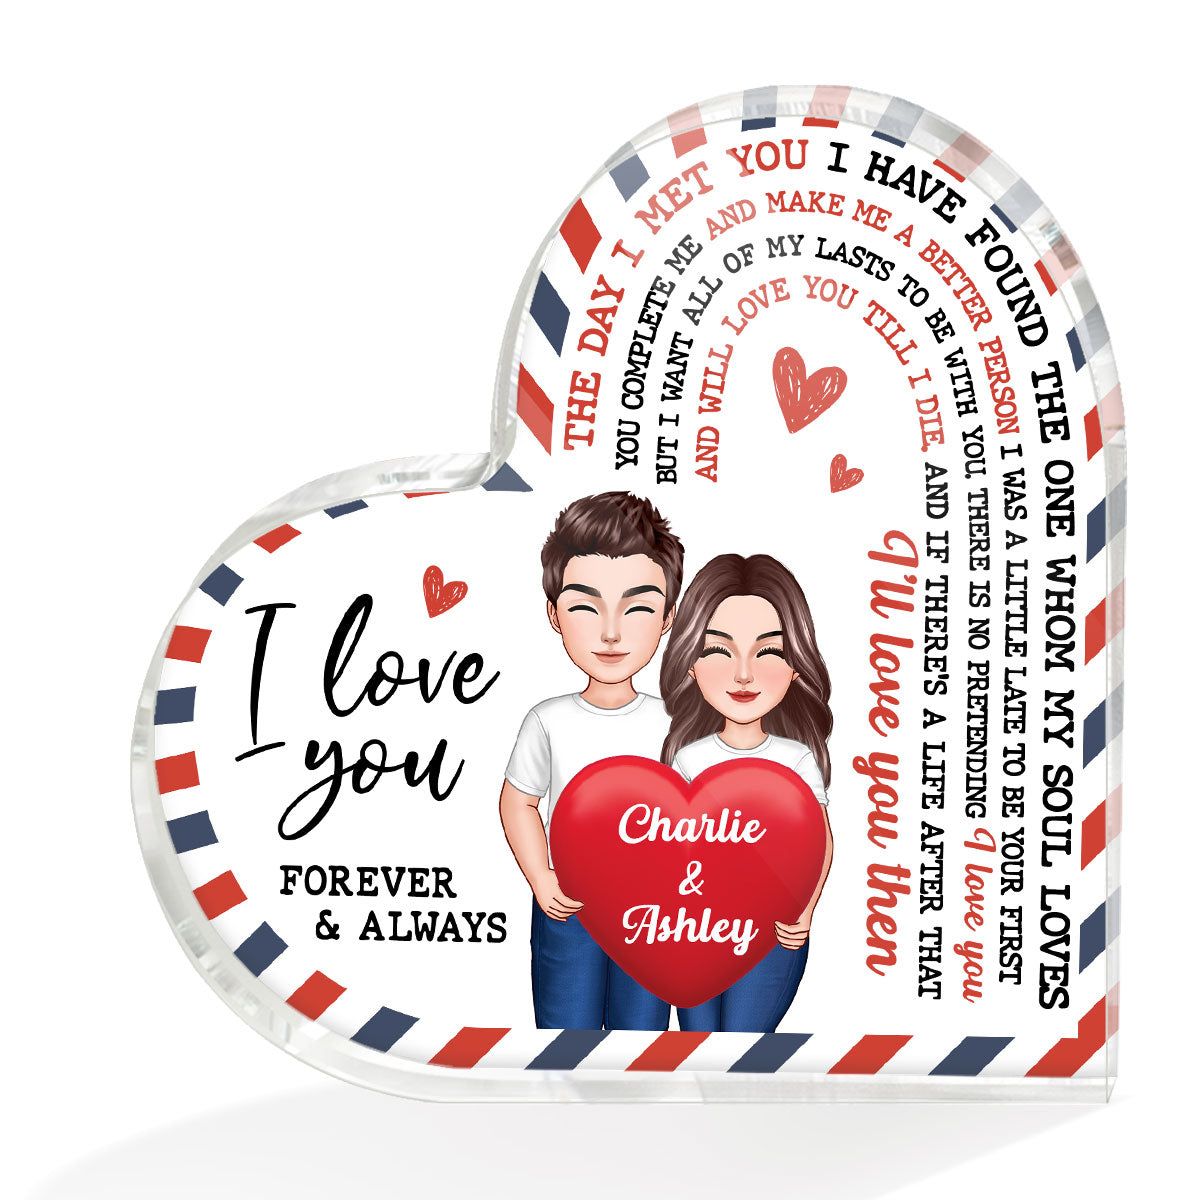 The Day I Met You Couple Holding Heart Envelope Frame Personalized Heart Shape Acrylic Plaque